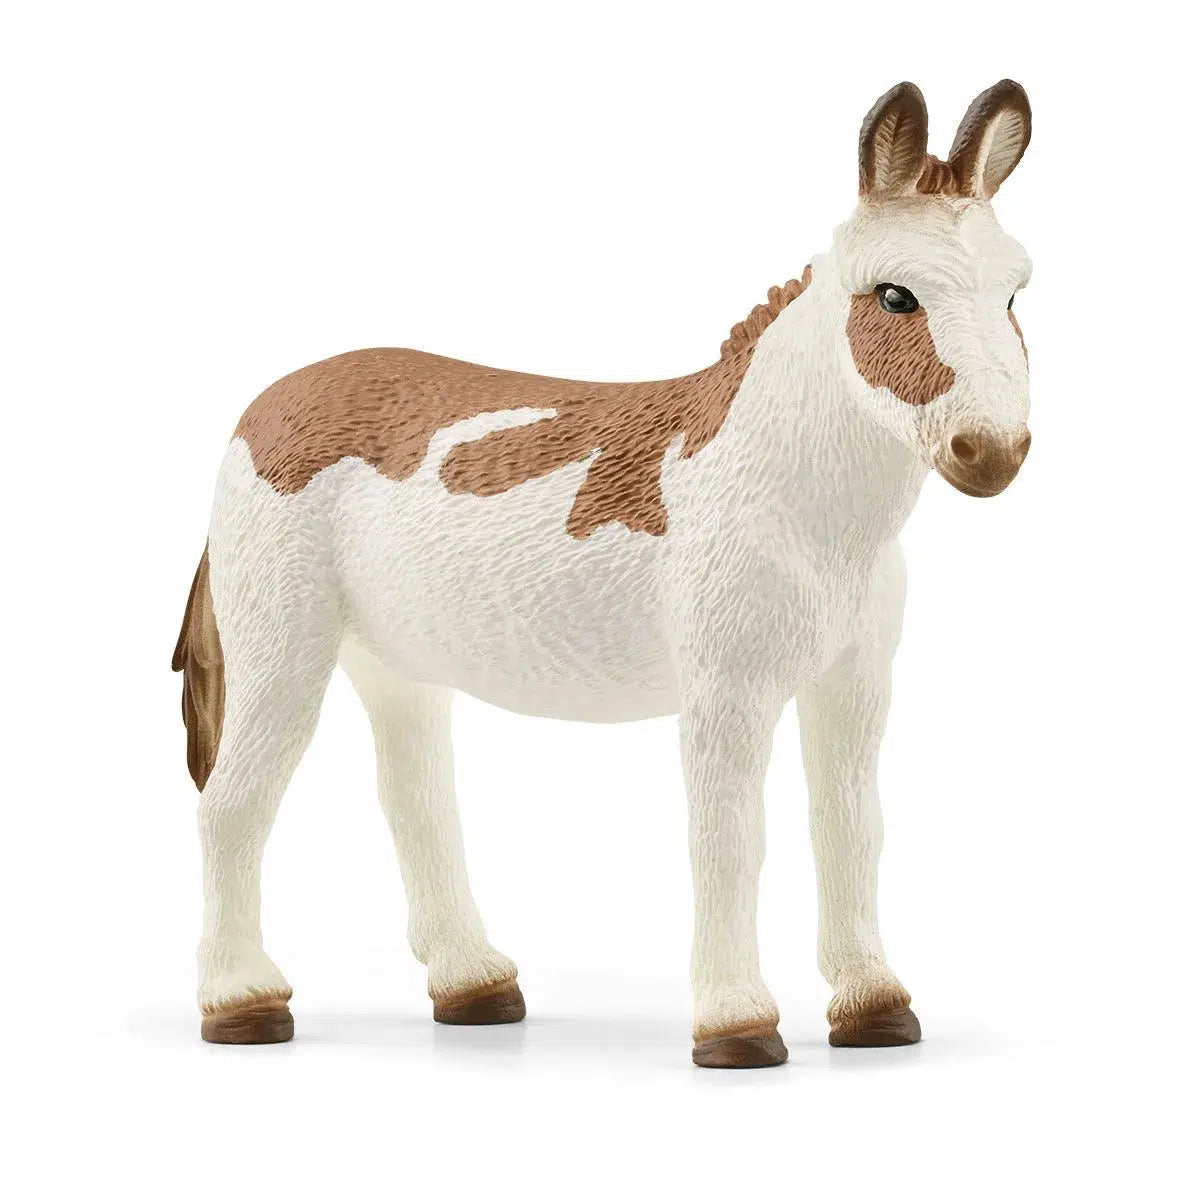 Schleich-American Spotted Donkey-13961-Legacy Toys